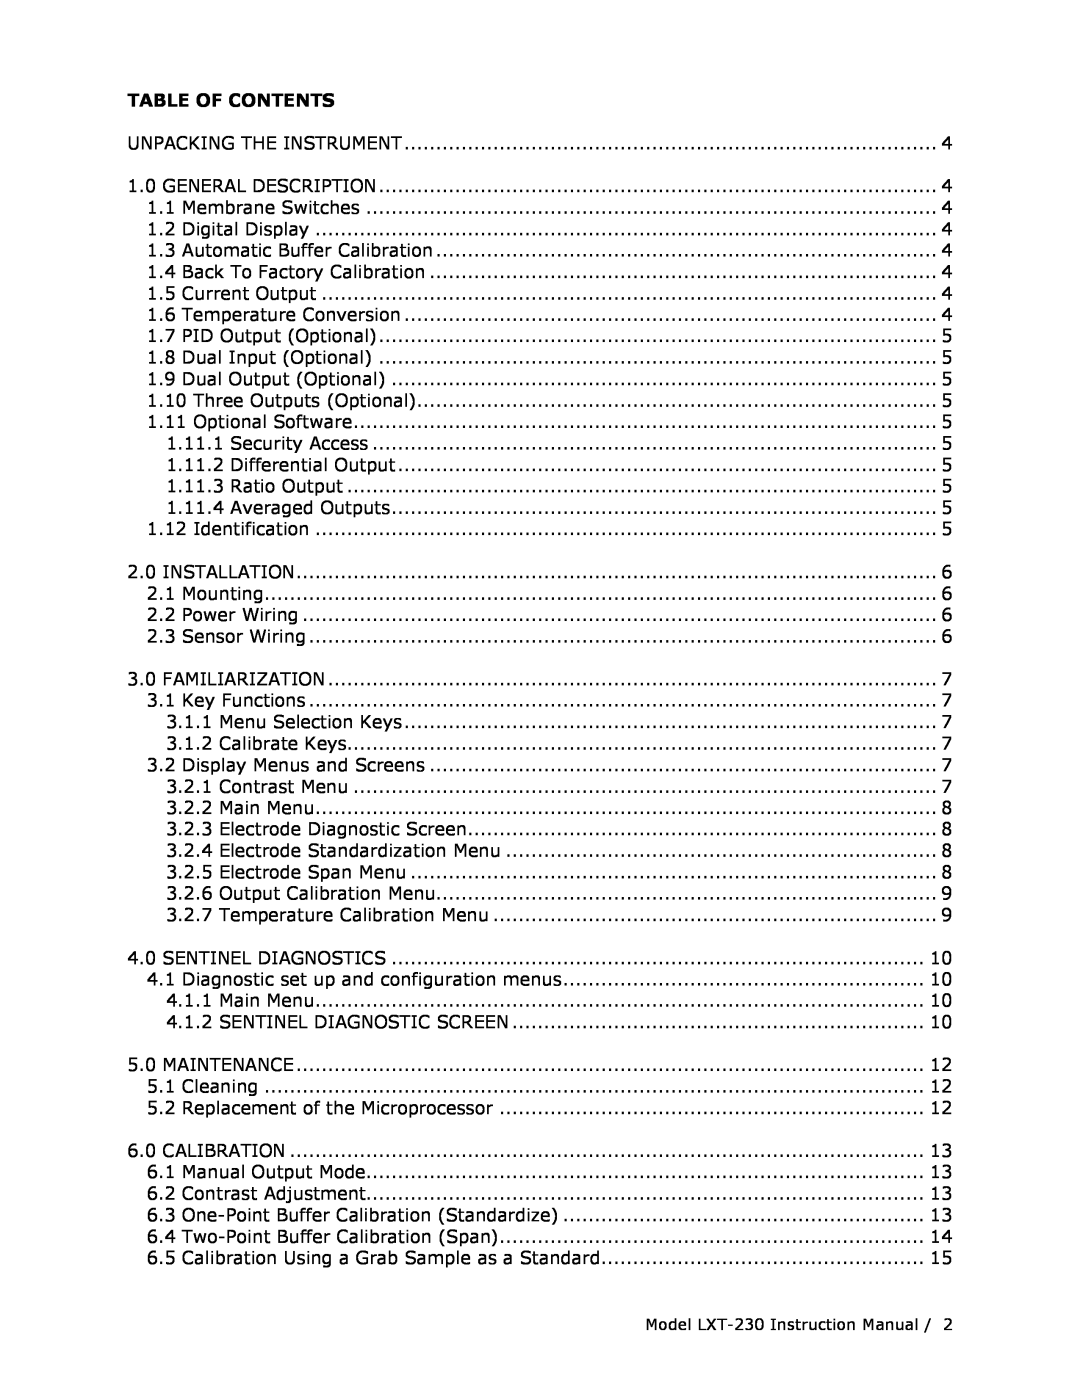 Teledyne LXT-230 manual Table Of Contents 